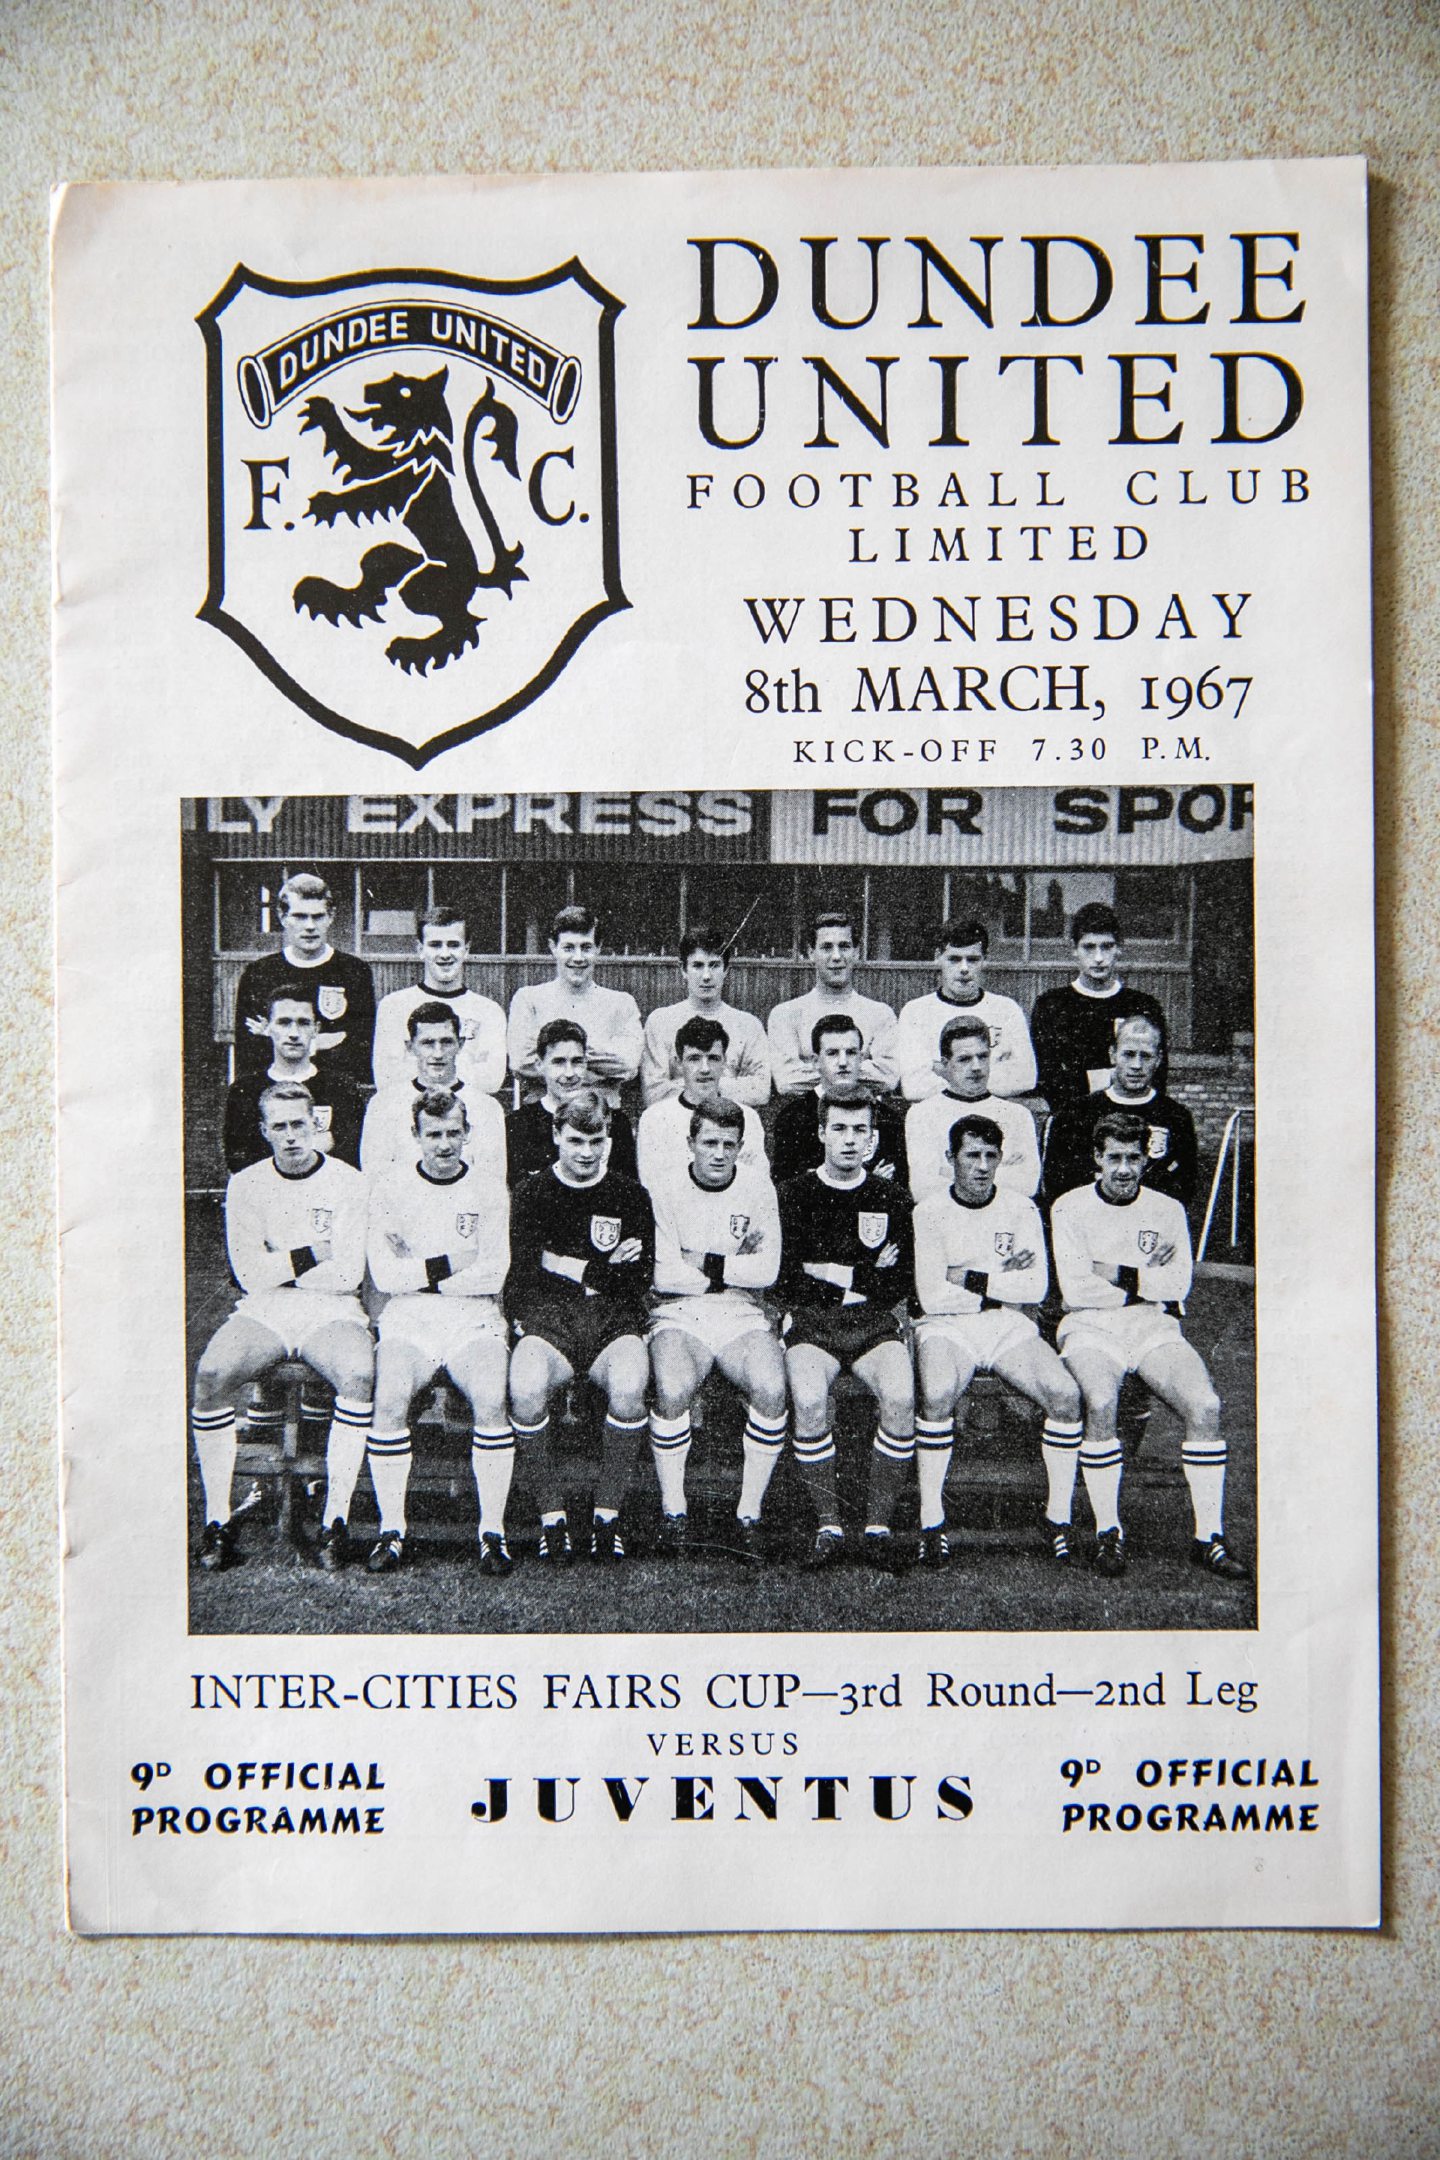 The Dundee v Juventus programme